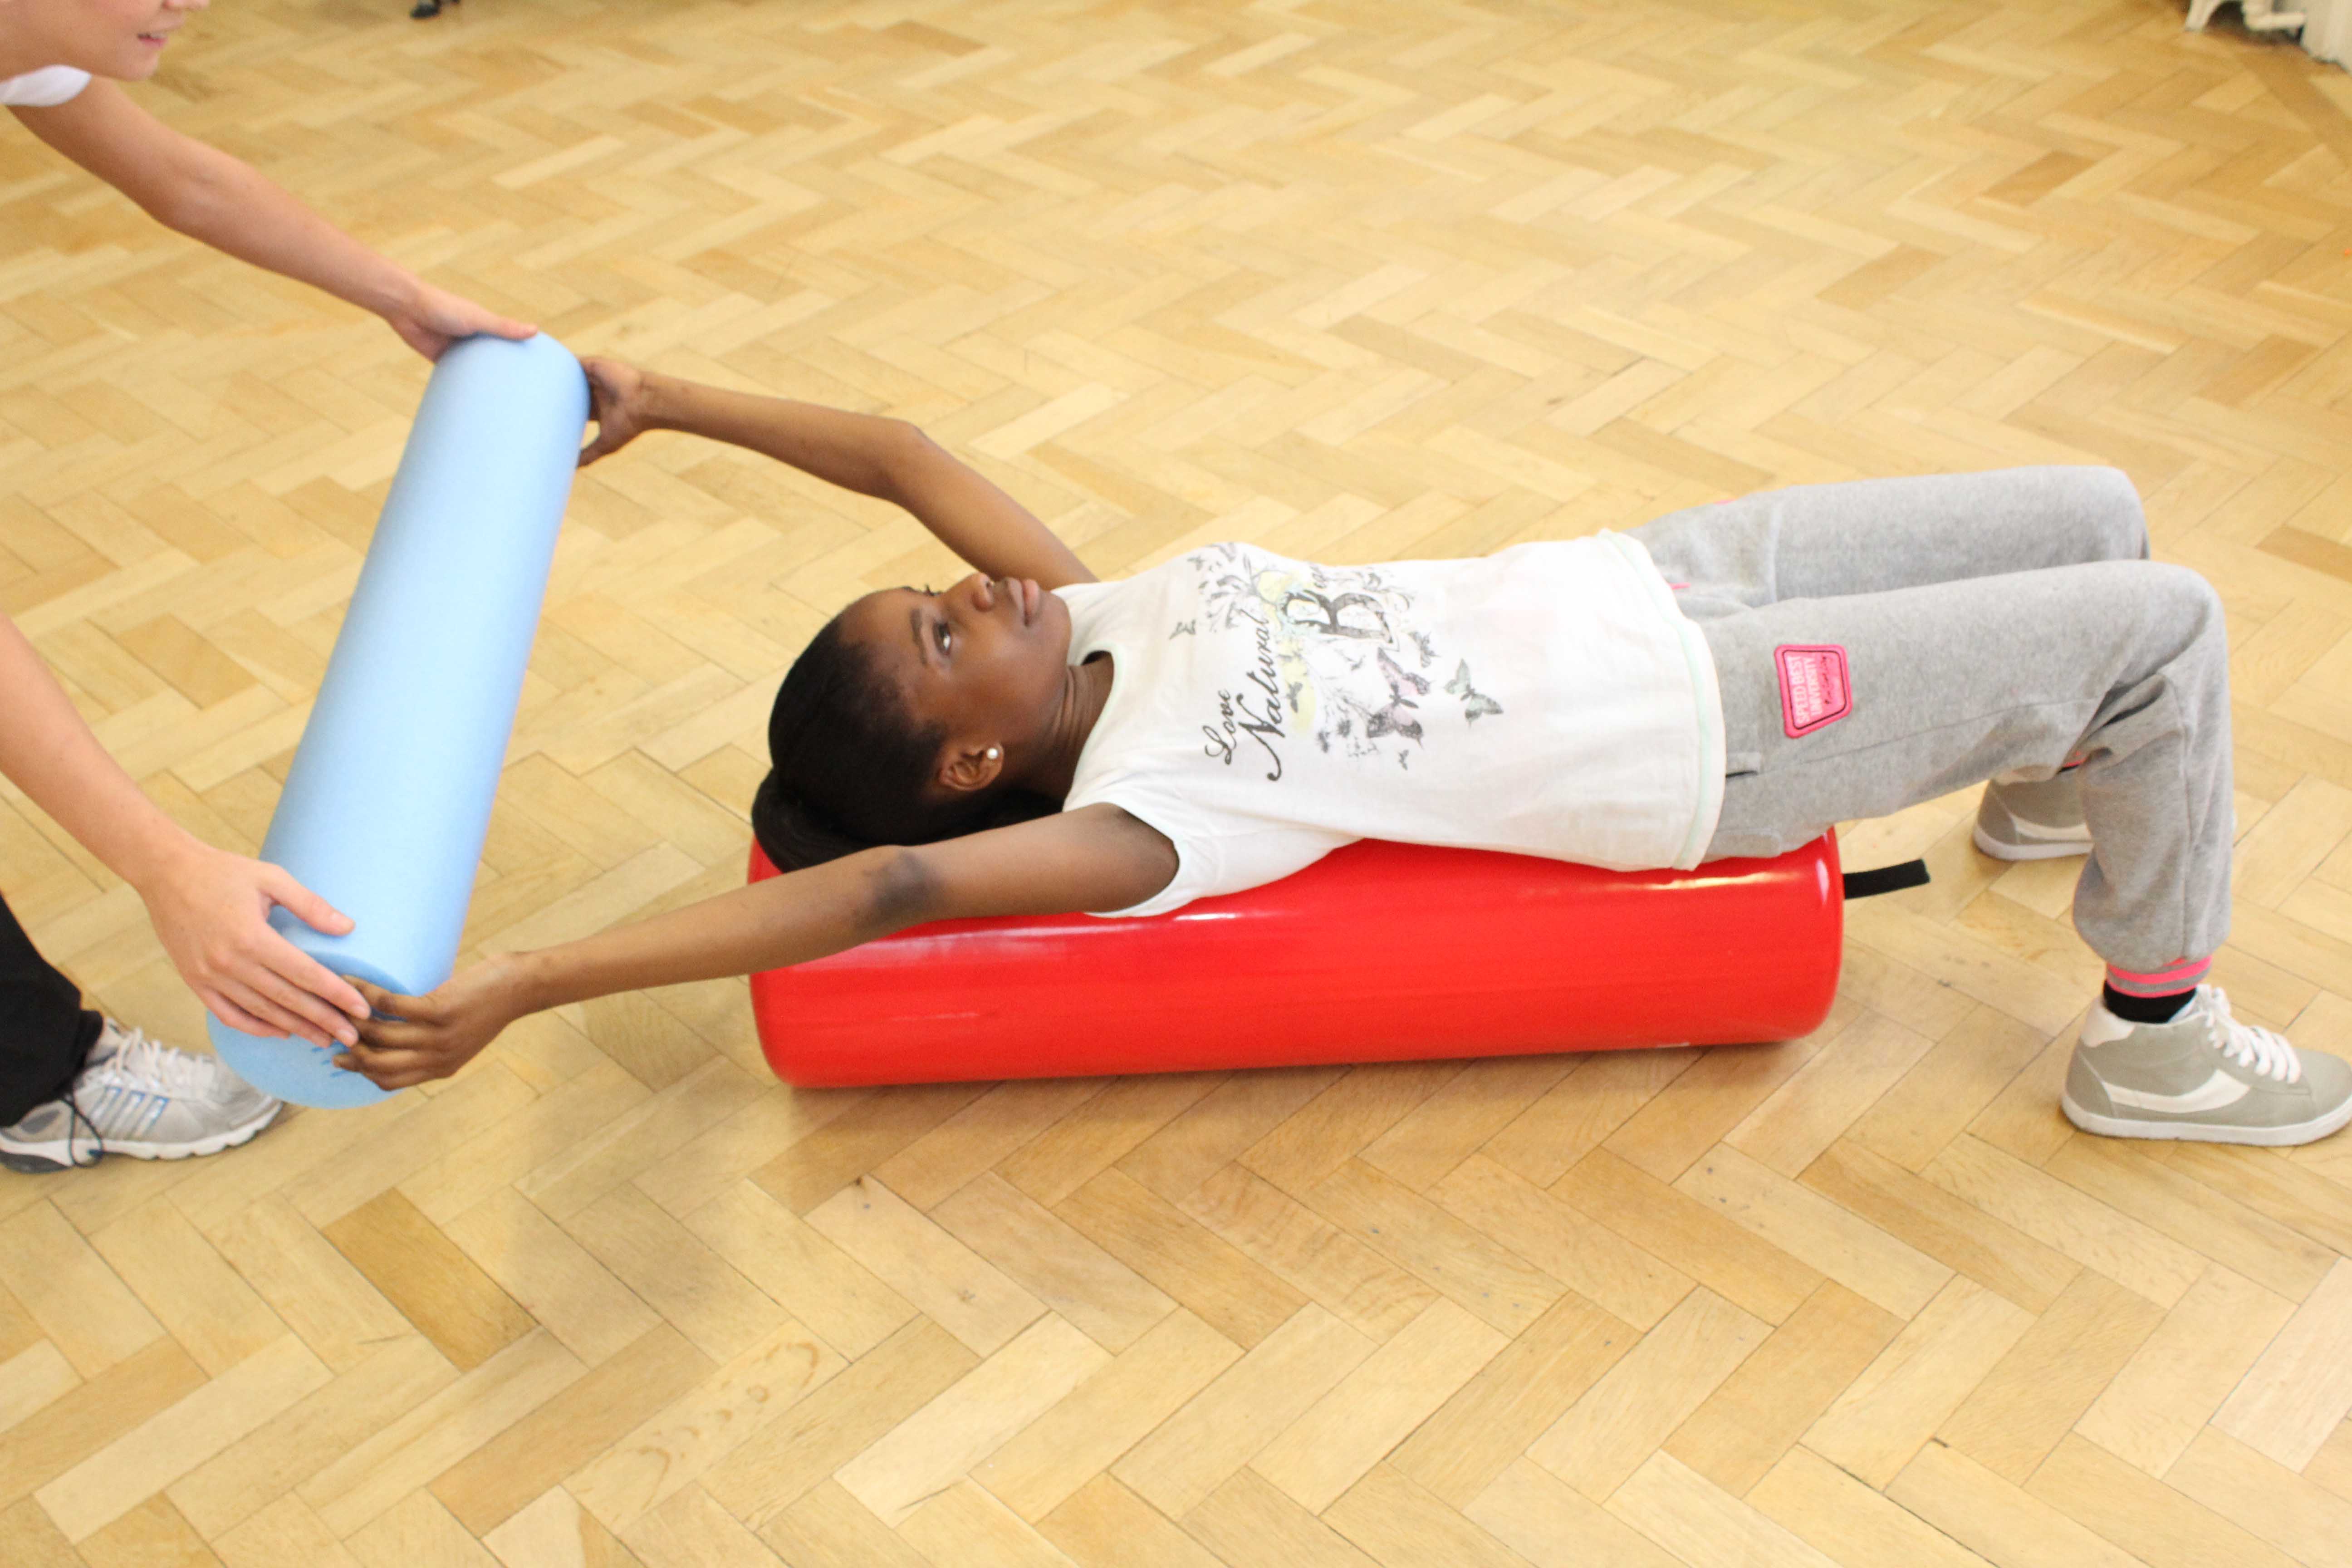 Mobility, balance and stretching exercises assisted by paediatric physiotherapist